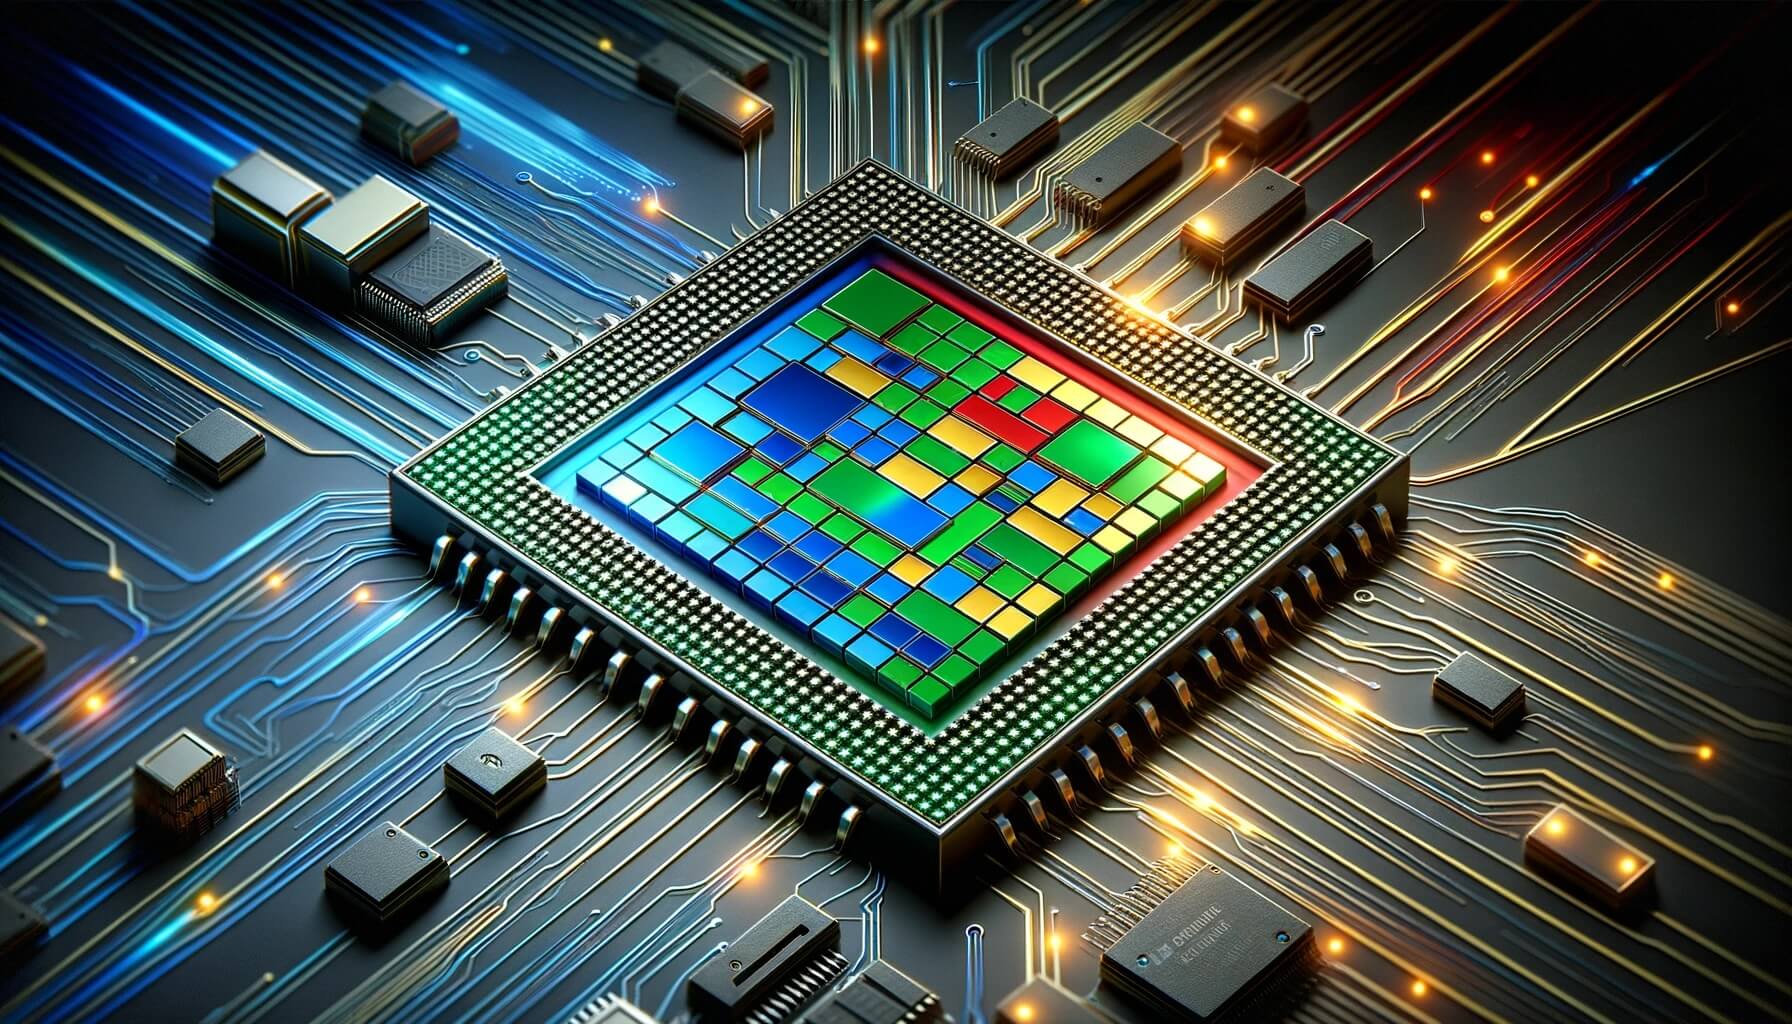 DALL%C2%B7E 2023 11 15 16.45.22 Enhance the news cover image for a cryptocurrency news site focusing on an AI processing chip specifically designed for generative artificial intelli